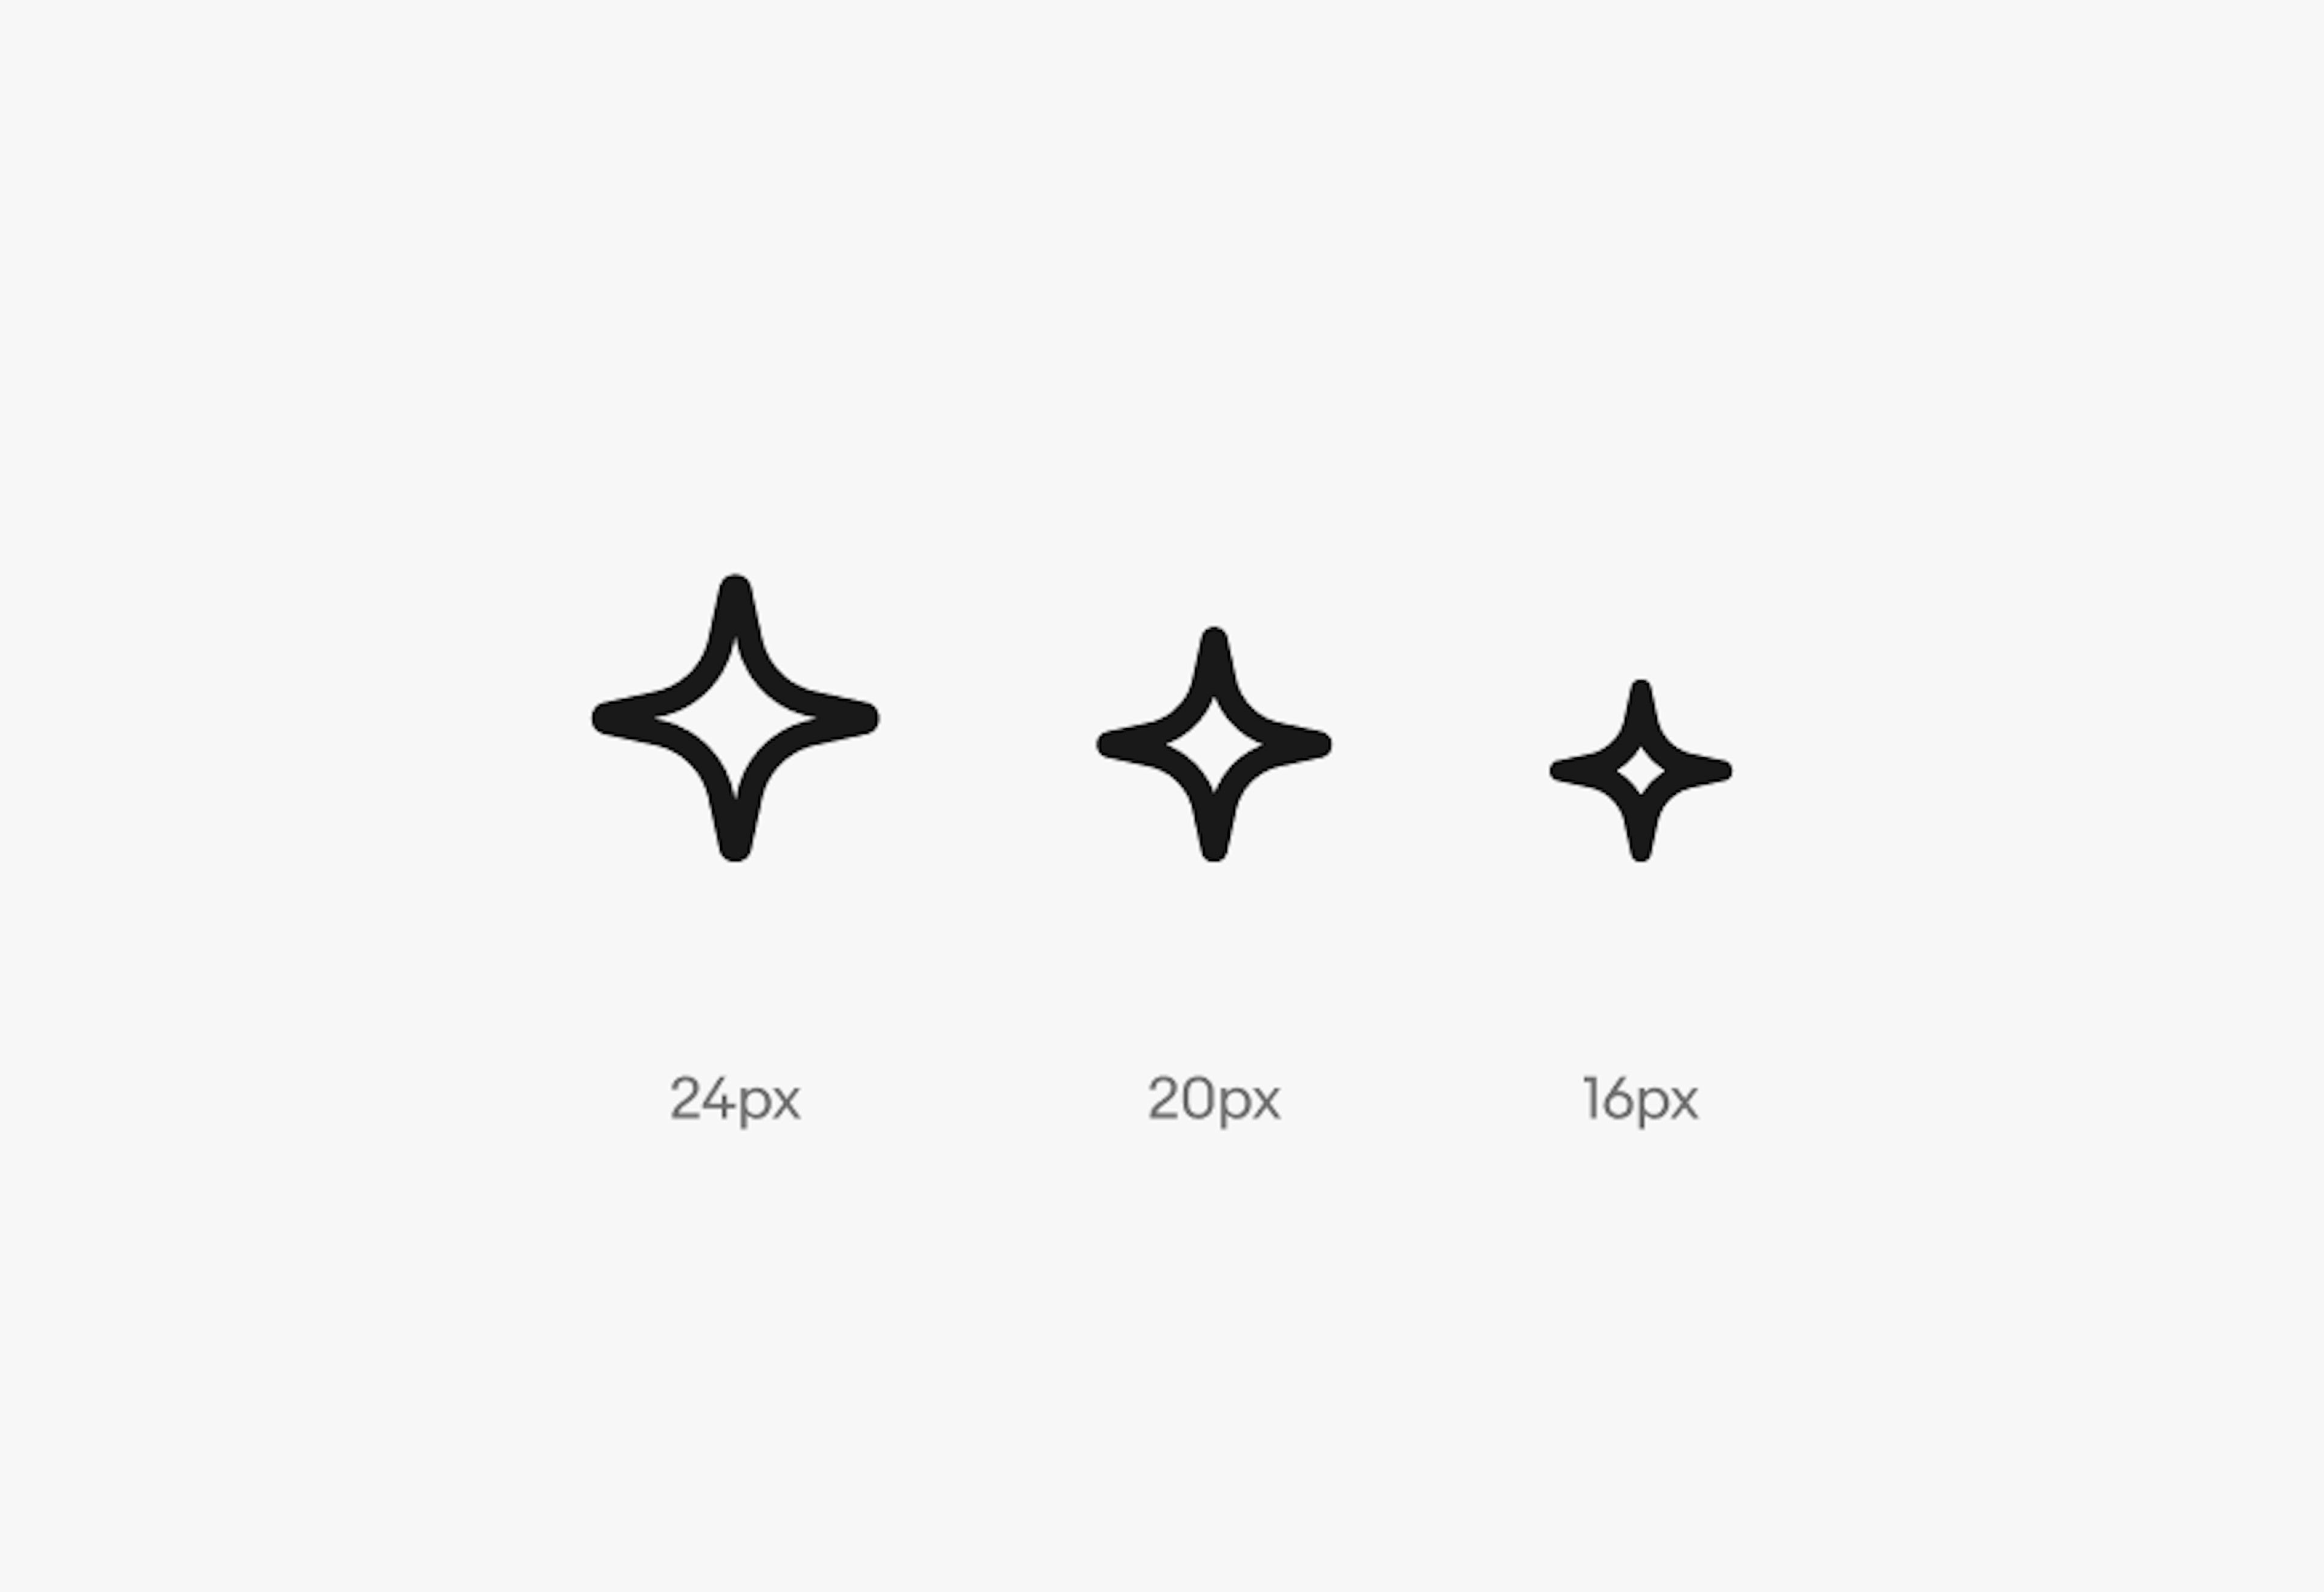 Our outlined AI icon in black in 3 different sizes - 24px, 20px, and 16px.